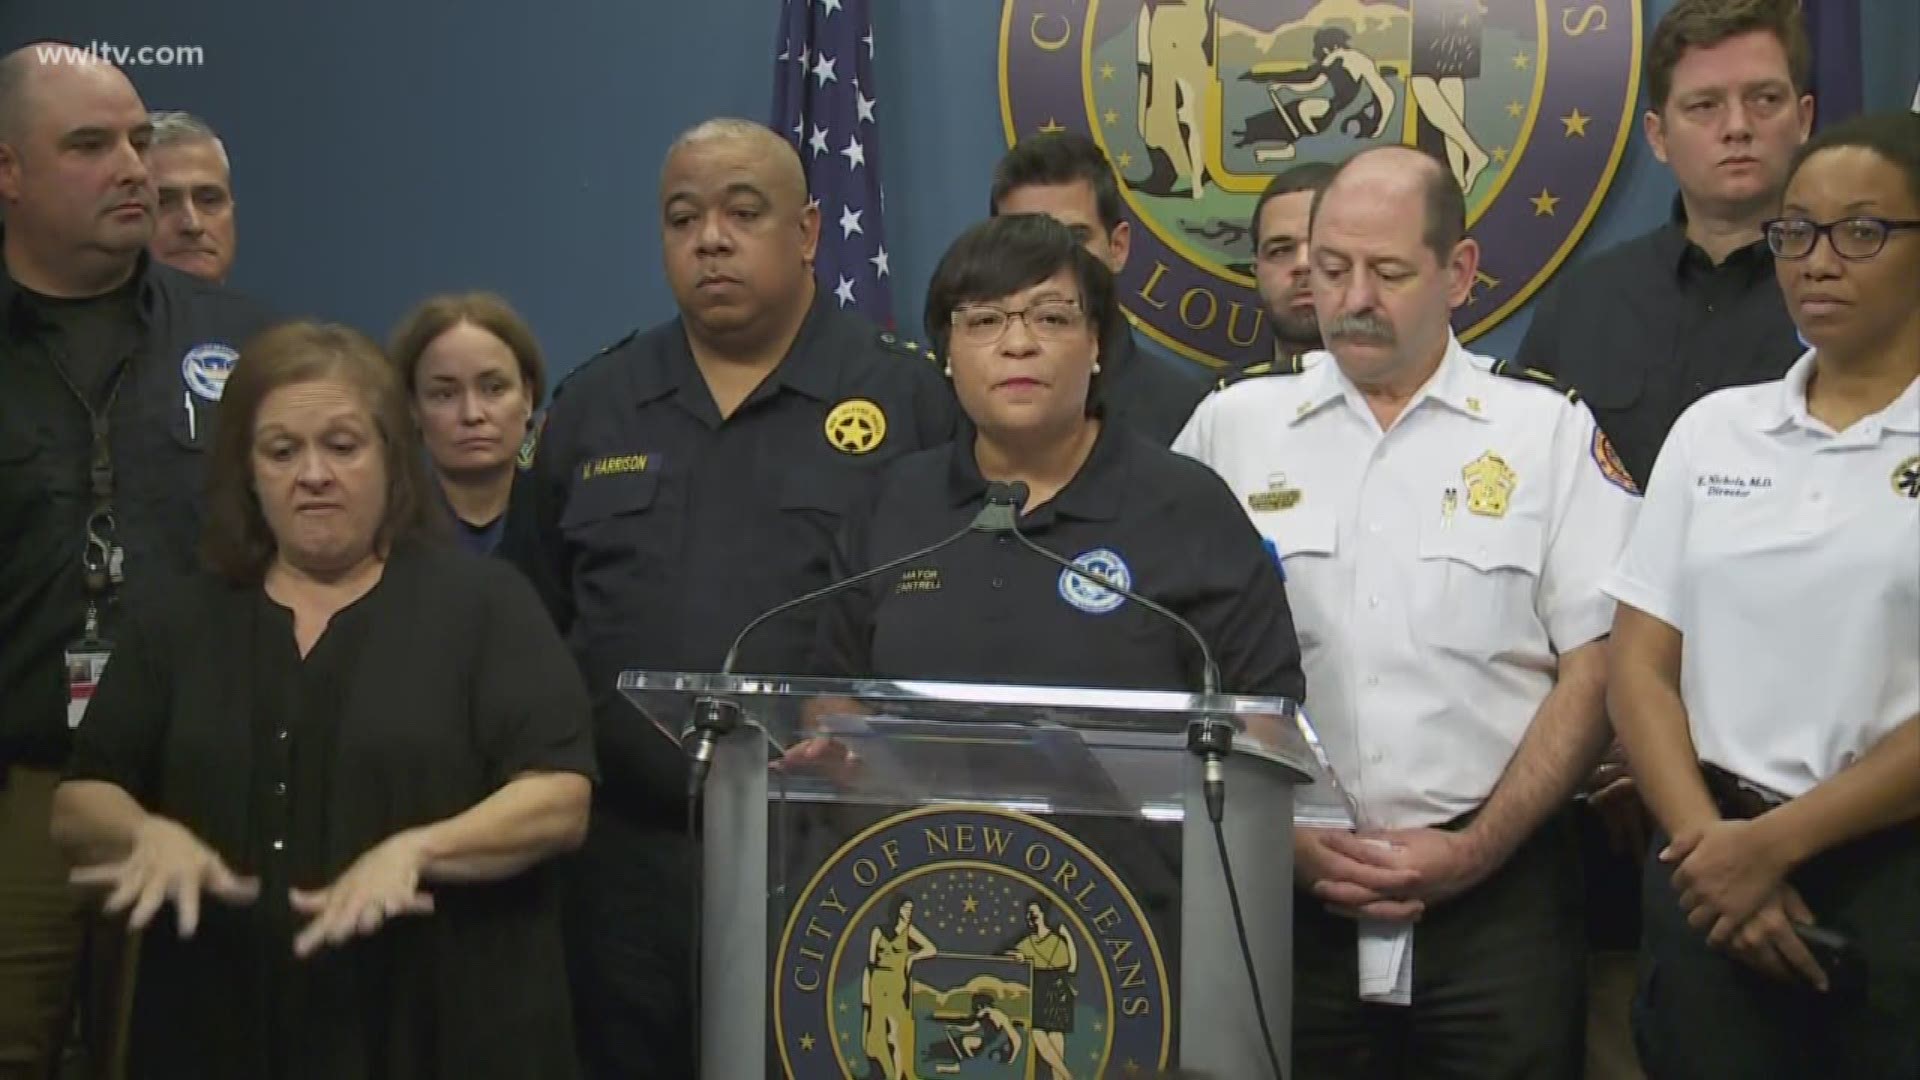 New Orleans Mayor LaToya Cantrell says voluntary evacuations have been issued for those in the Venetian Isles, Lake Catherine and Irish Bayou areas. Those areas are outside of the flood protection system.